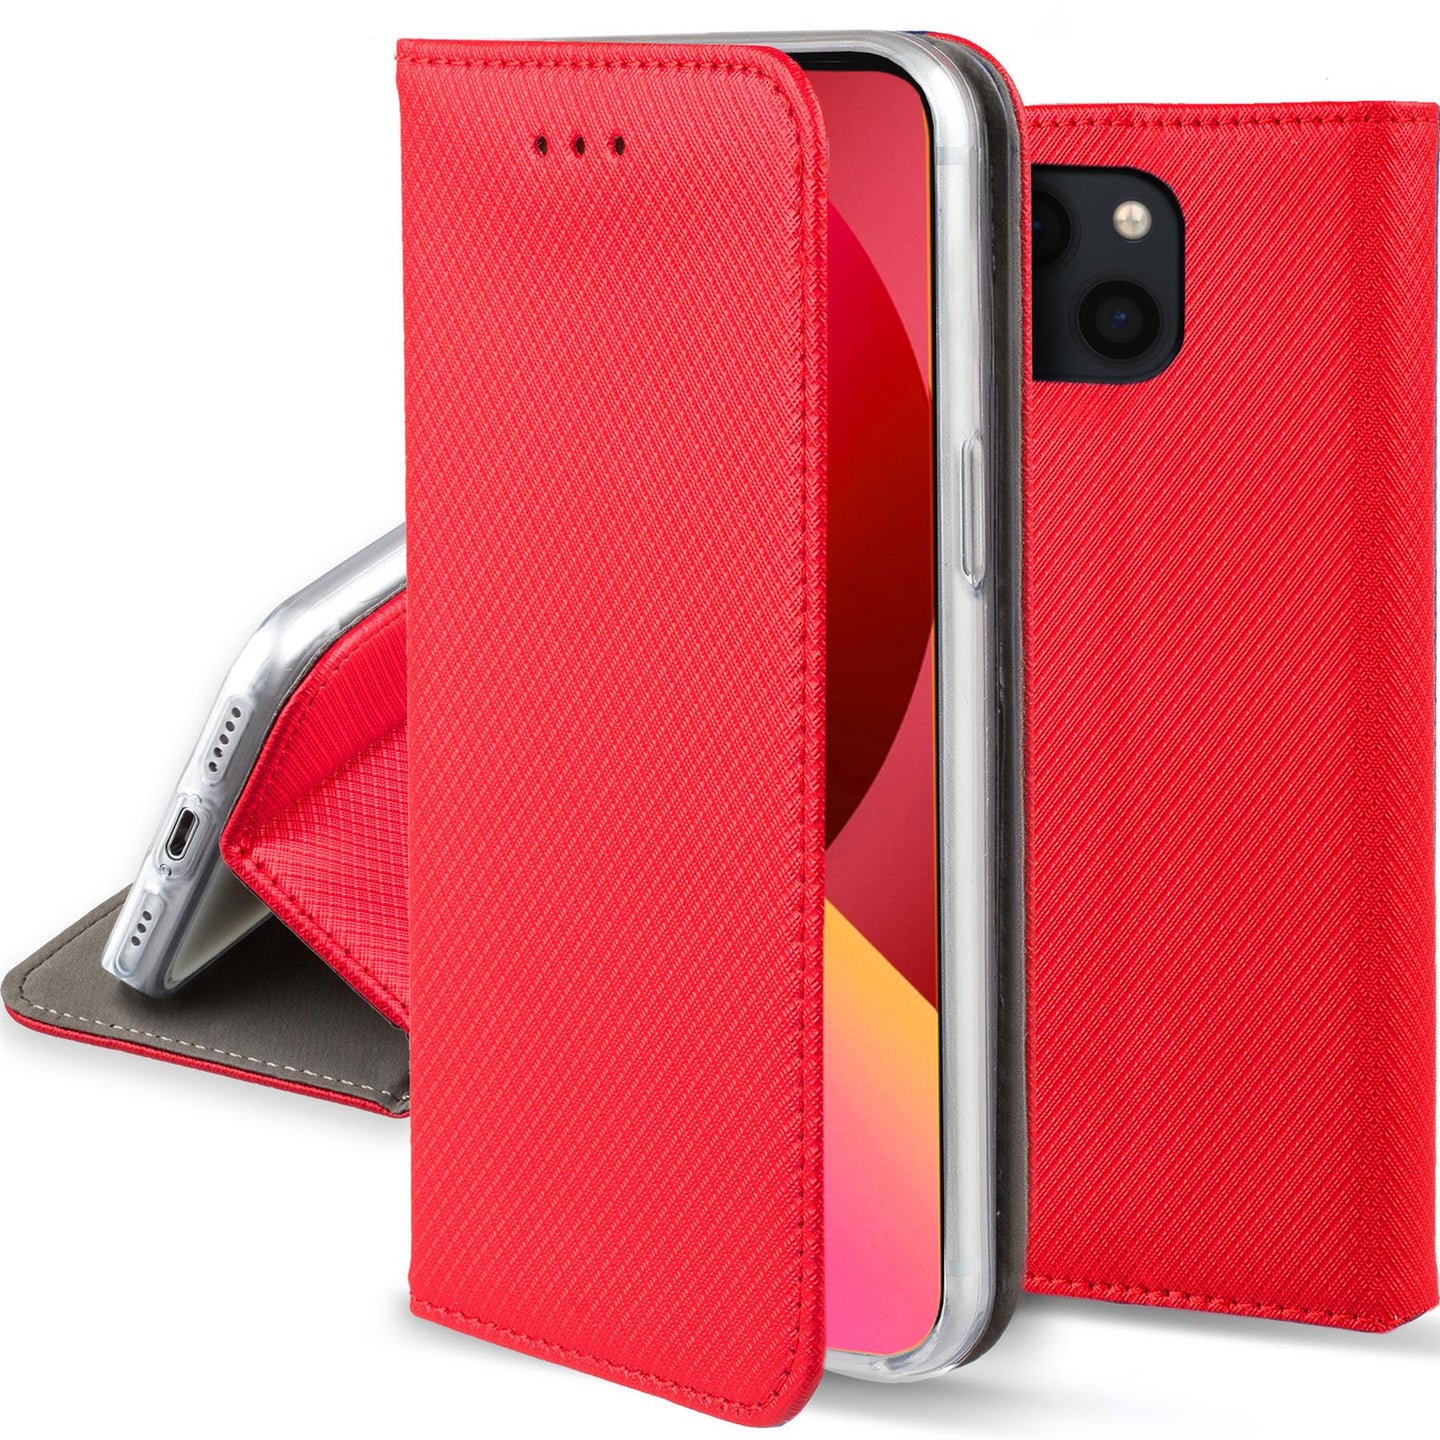 Moozy Case Flip Cover for iPhone 13, Red - Smart Magnetic Flip Case Flip Folio Wallet Case with Card Holder and Stand, Credit Card Slots10,99